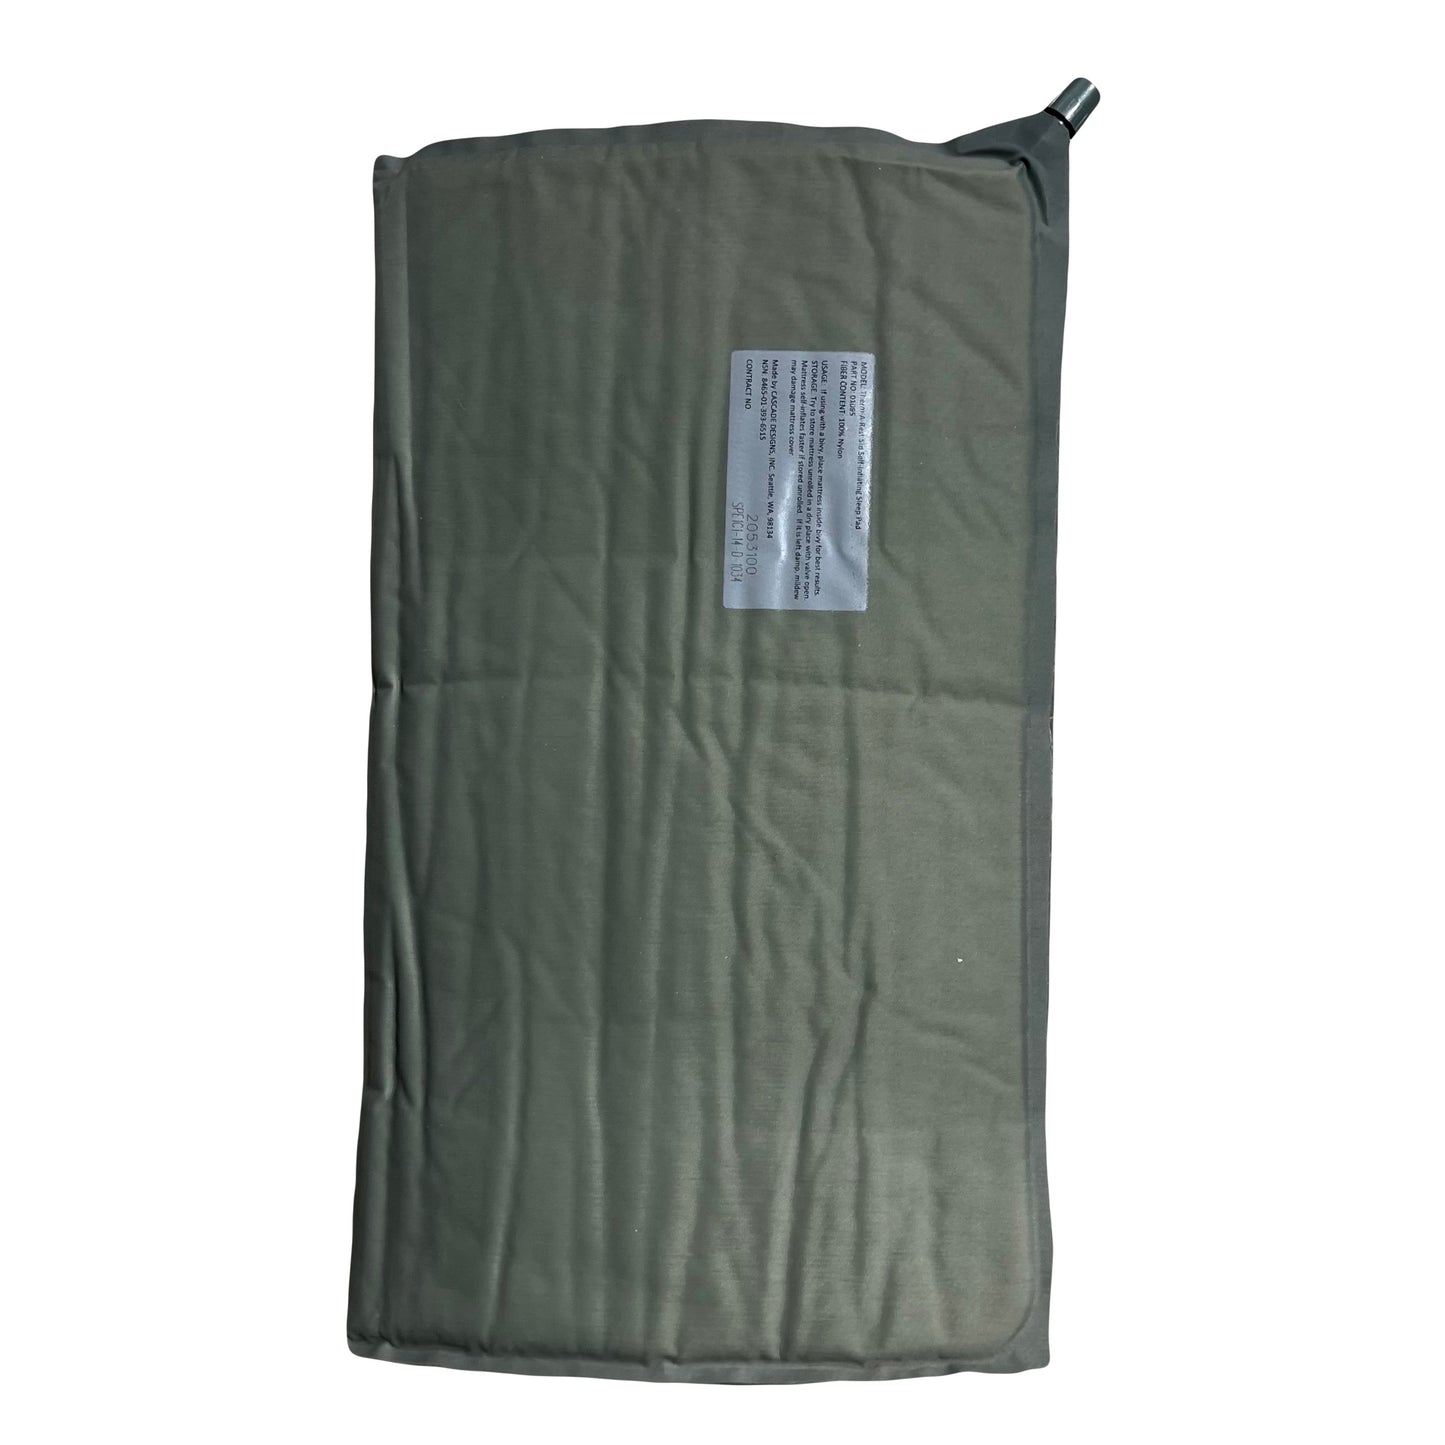 US Military GI Issue Therm A Rest Self-Inflating Sleeping Mat